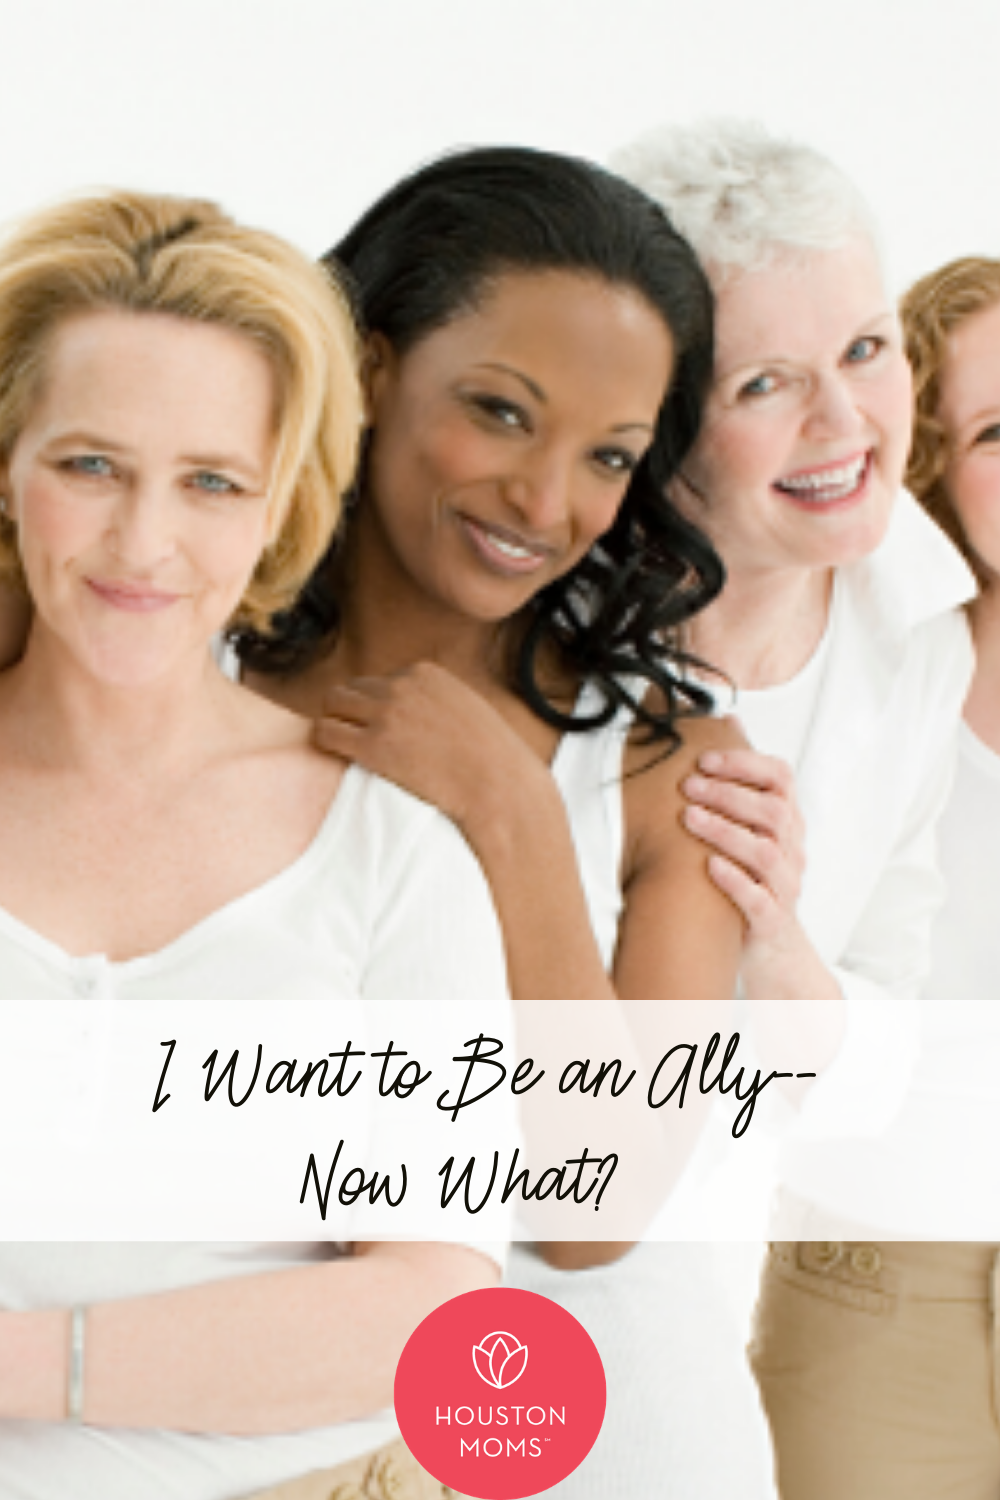 Houston Moms Blog "I Want to Be an Ally-- Now What?" #houstonmoms #houstonmomsblog #momsaroundhouston